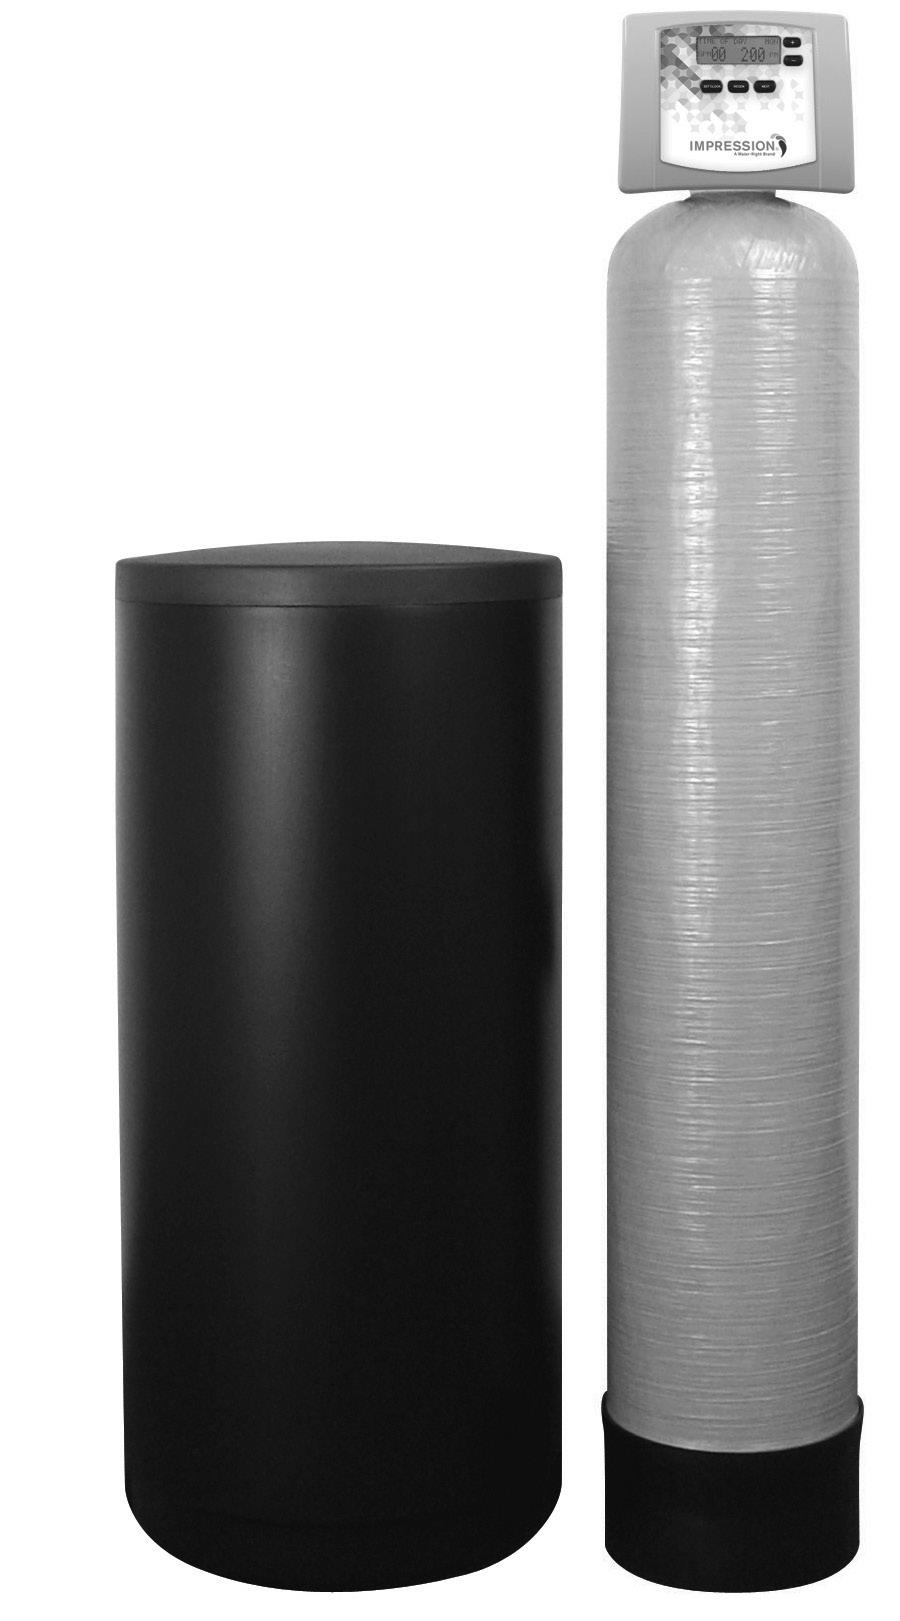 Impression Plus Series Metered Water Softeners For Certified Models: IMP-844 IMP-948